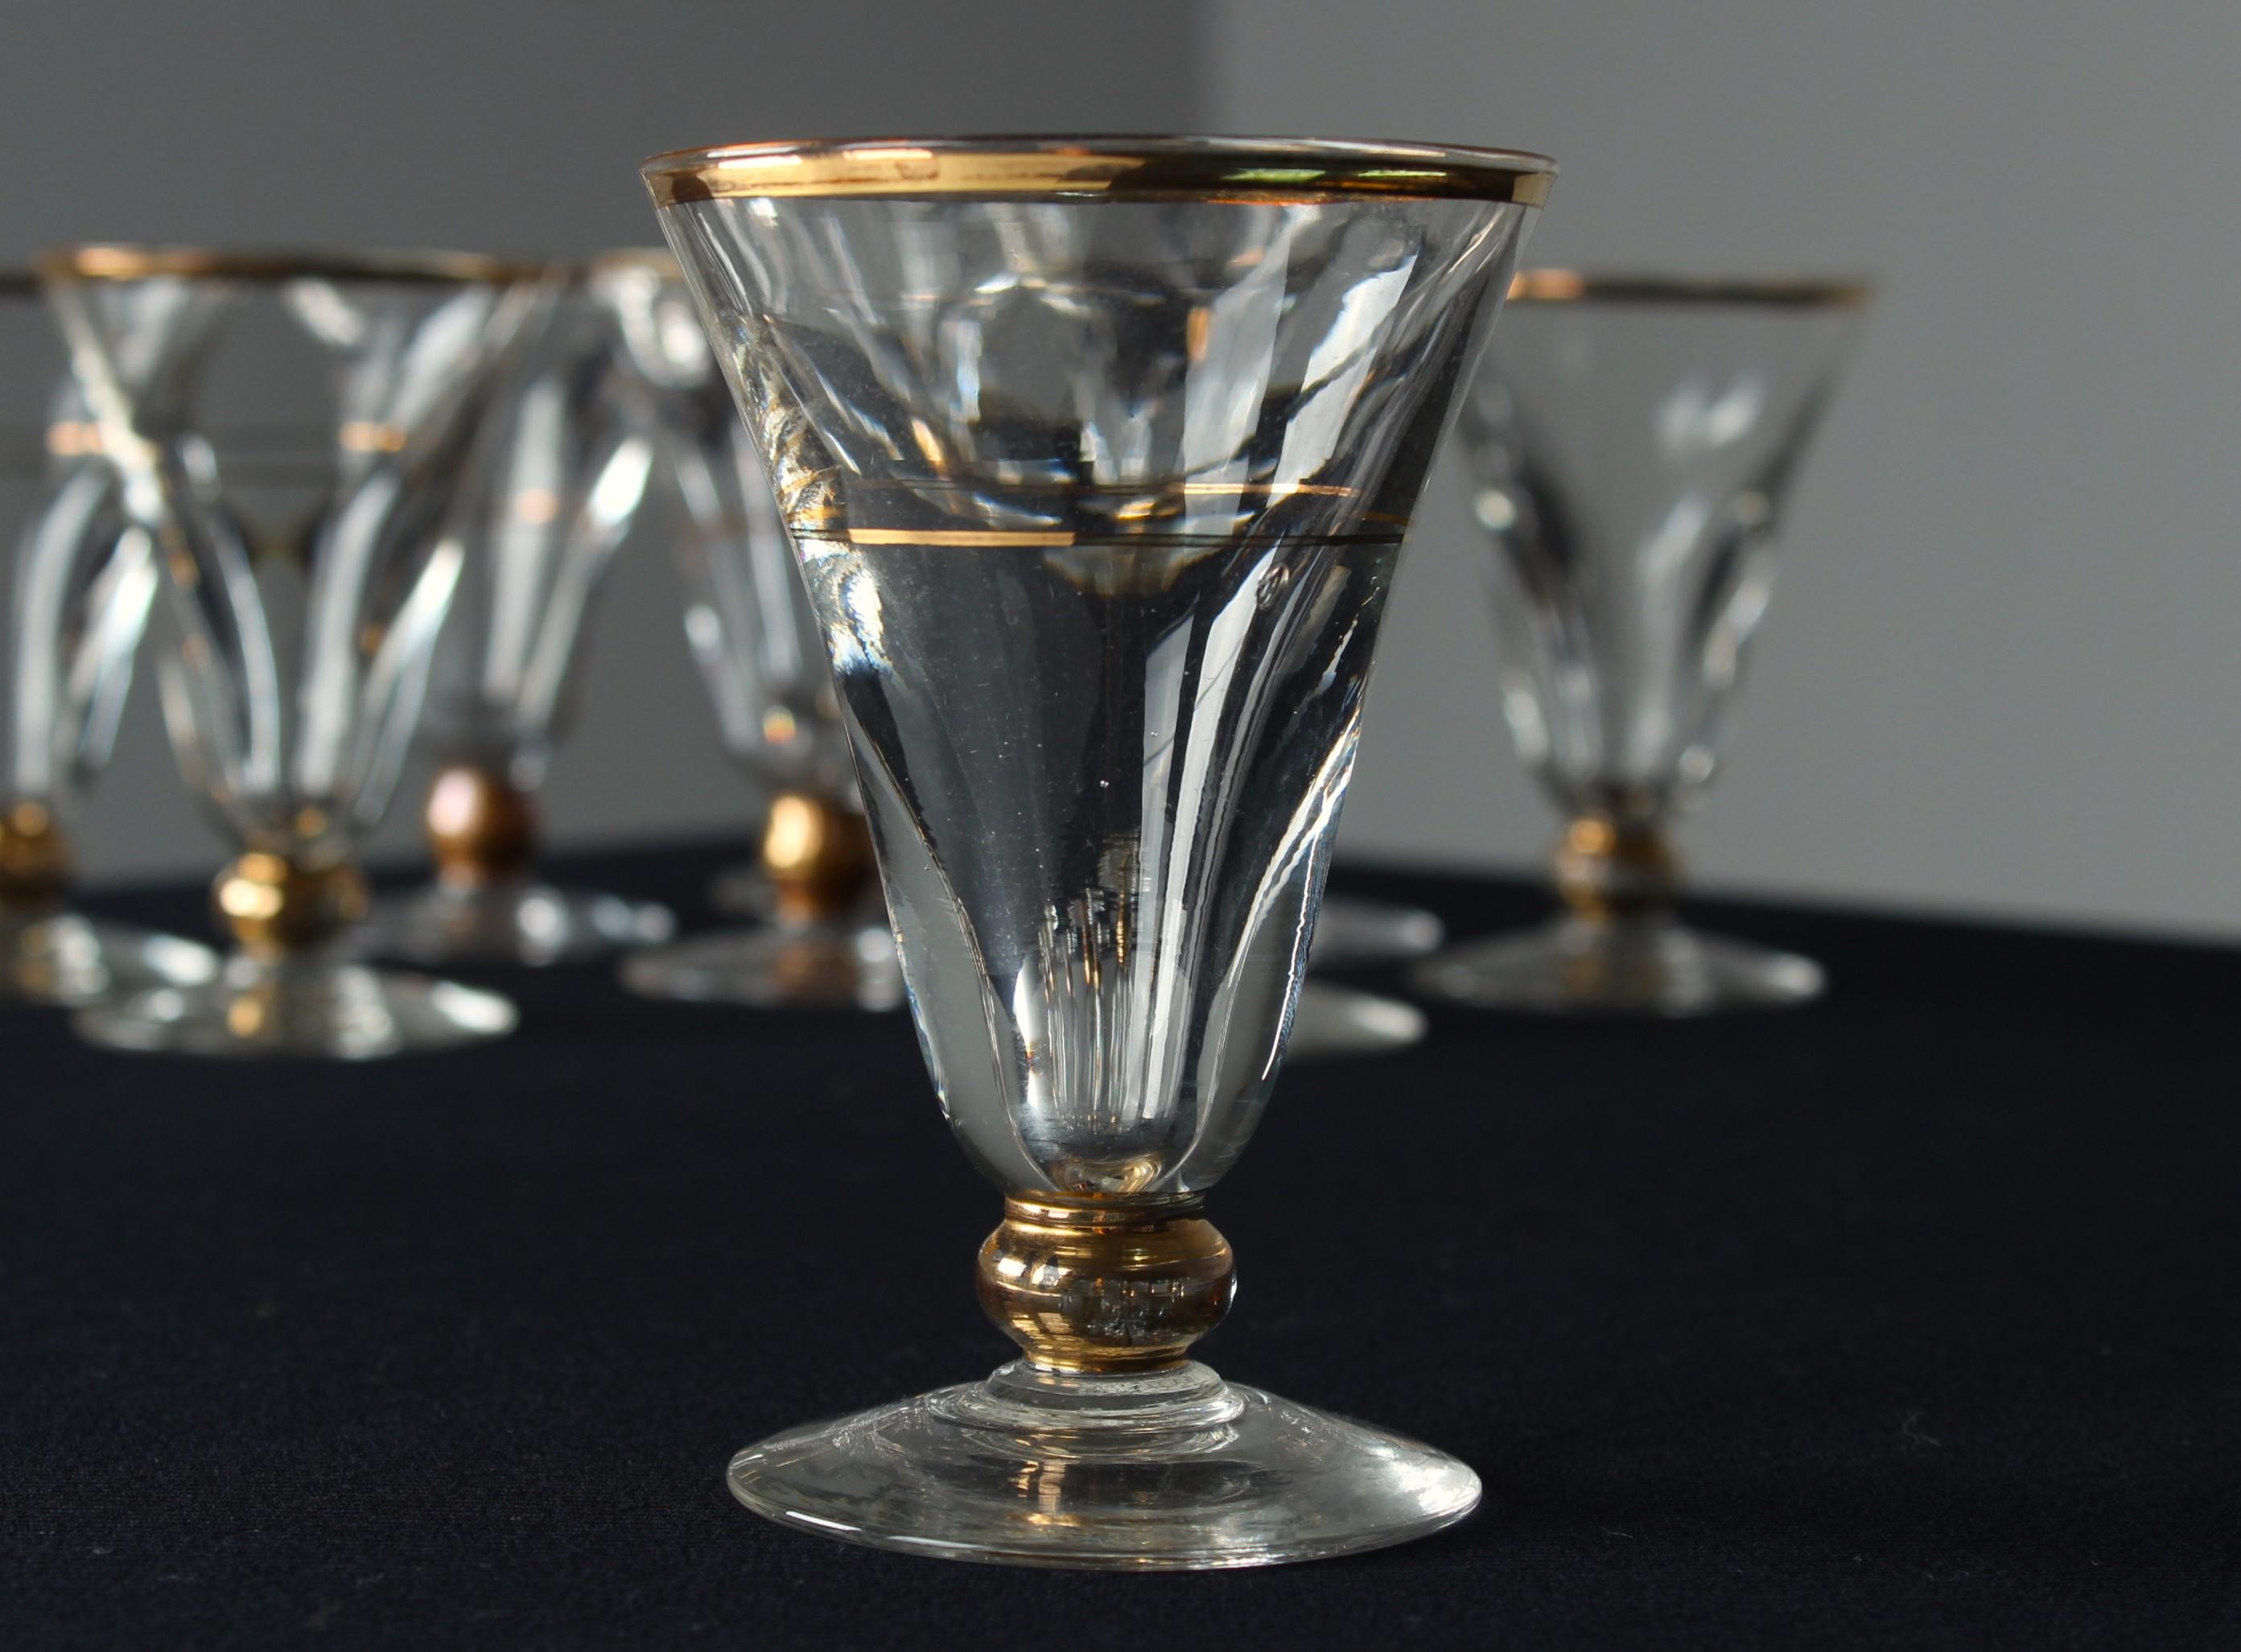 French 9 Art Nouveau Aperitif Glasses, 1900s, France, Crystal Glass With Gold Decor For Sale